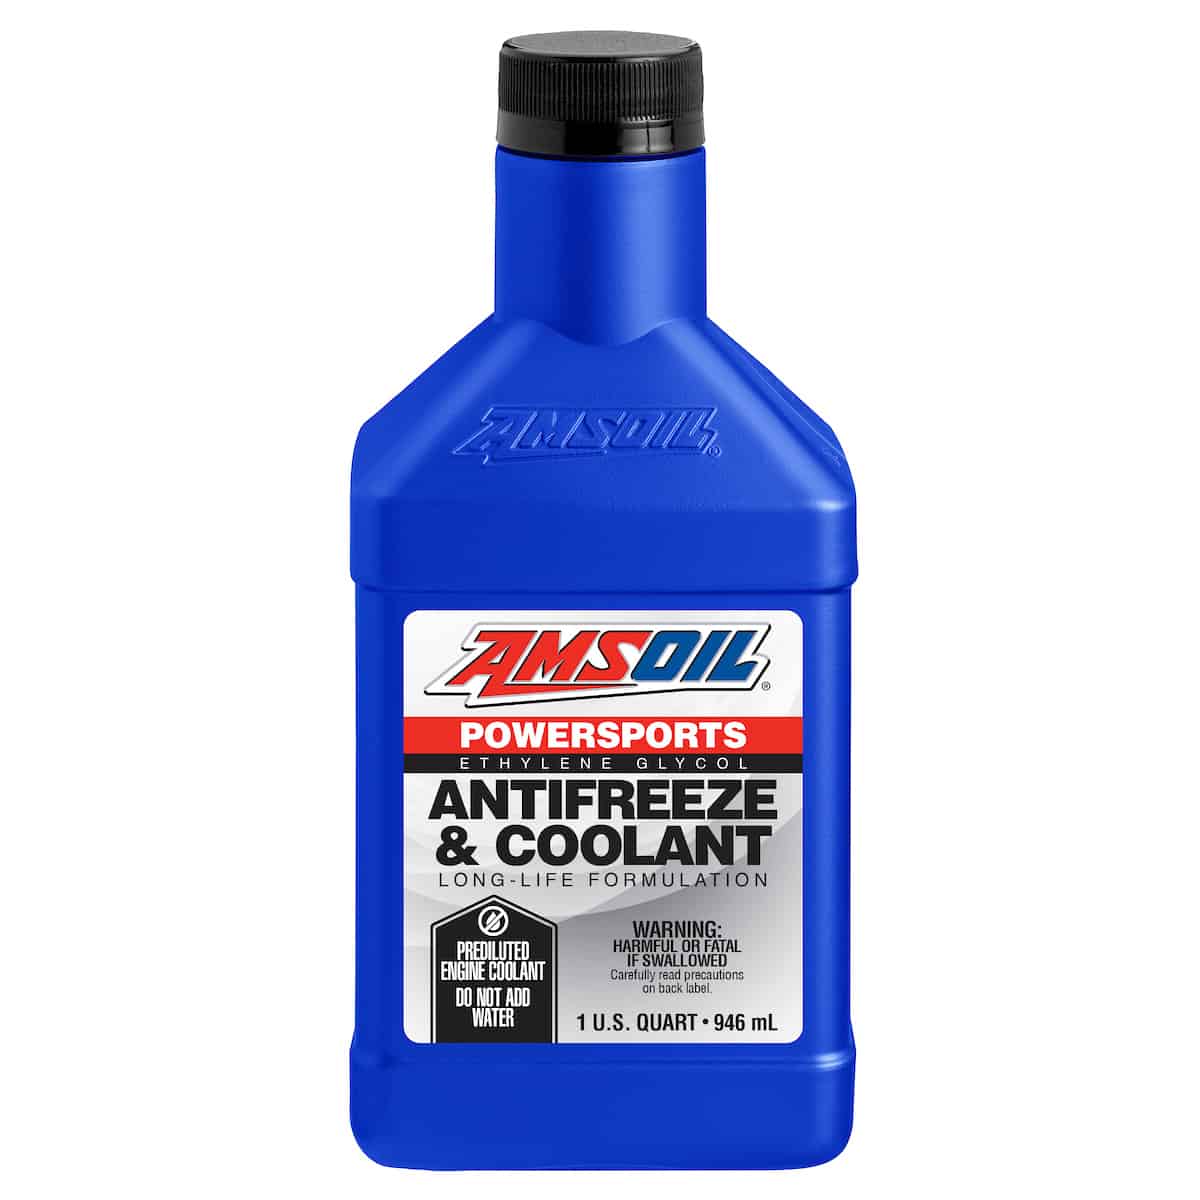 A bottle of AMSOIL Powersports Antifreeze & Coolant, formulated for all types of powersports equipment. It protects against freezing, corrosion, etc.